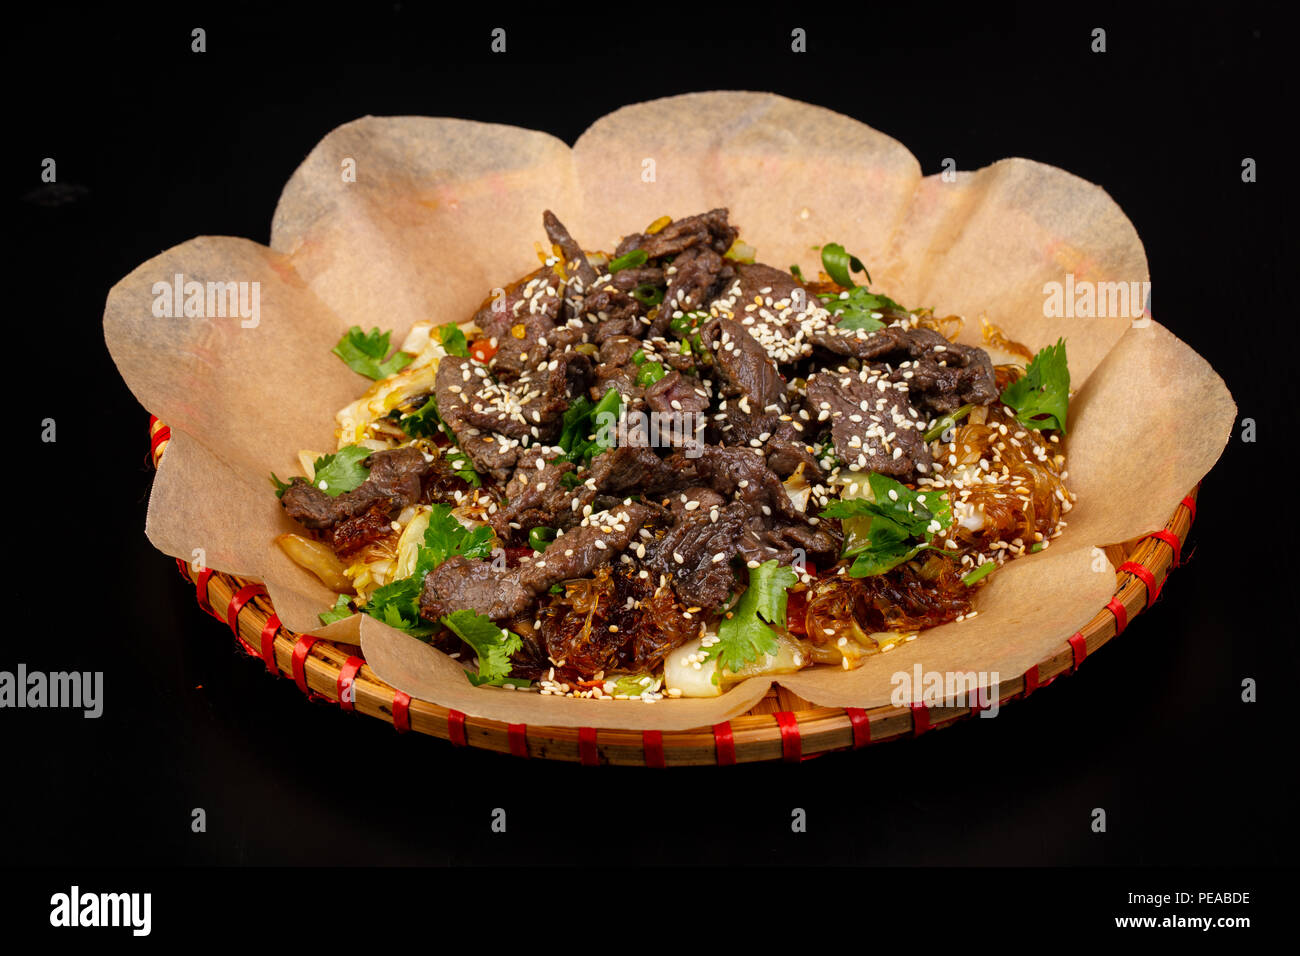 Asian cuisine - Fried glass noodle with beef Stock Photo